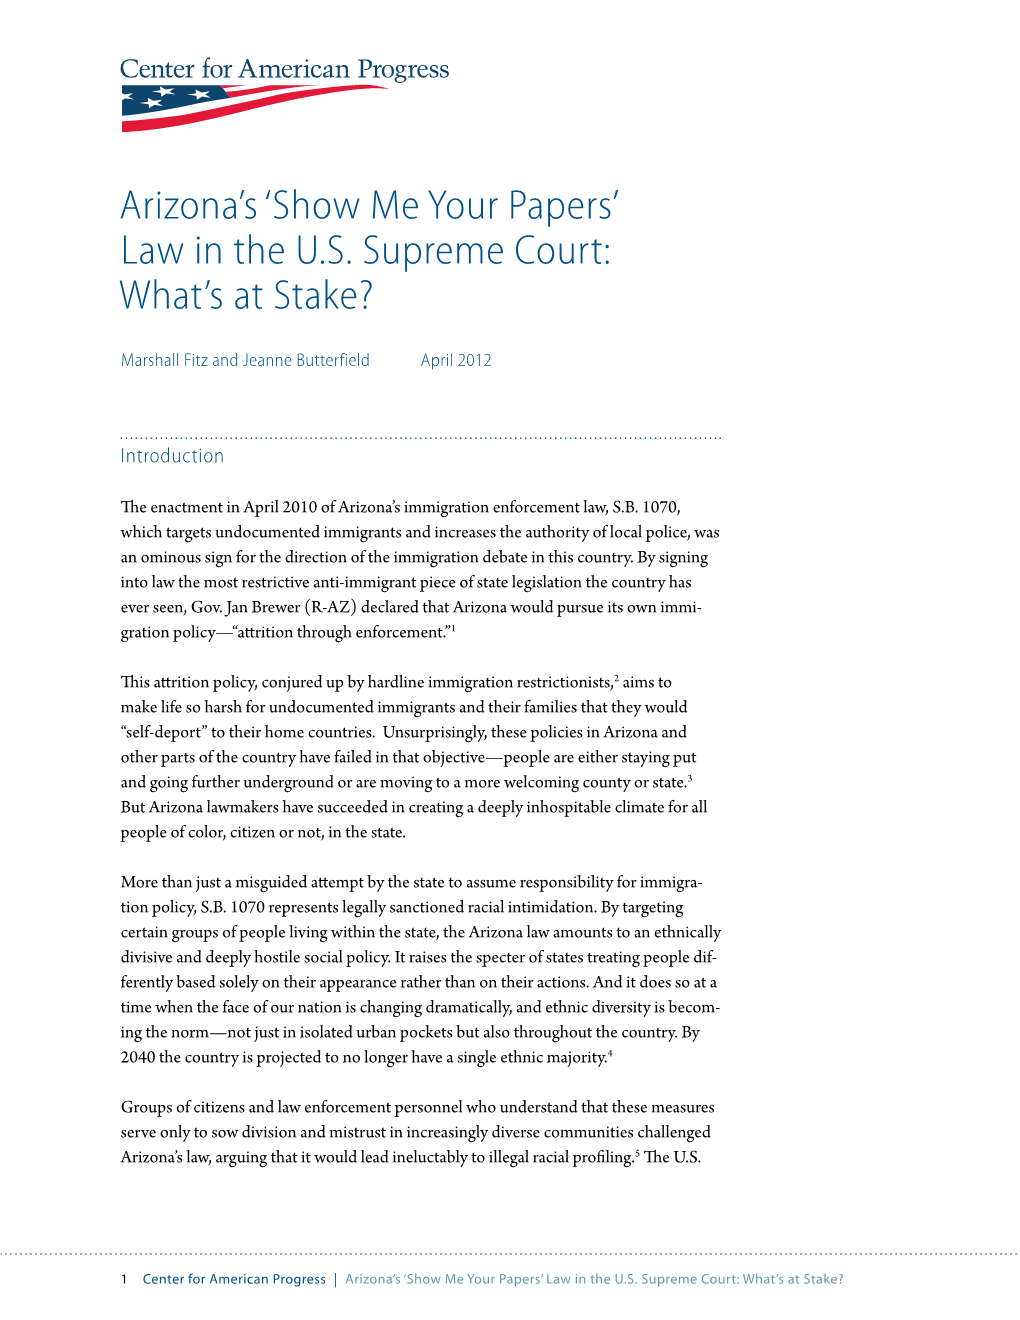 Arizona's 'Show Me Your Papers' Law in the US Supreme Court